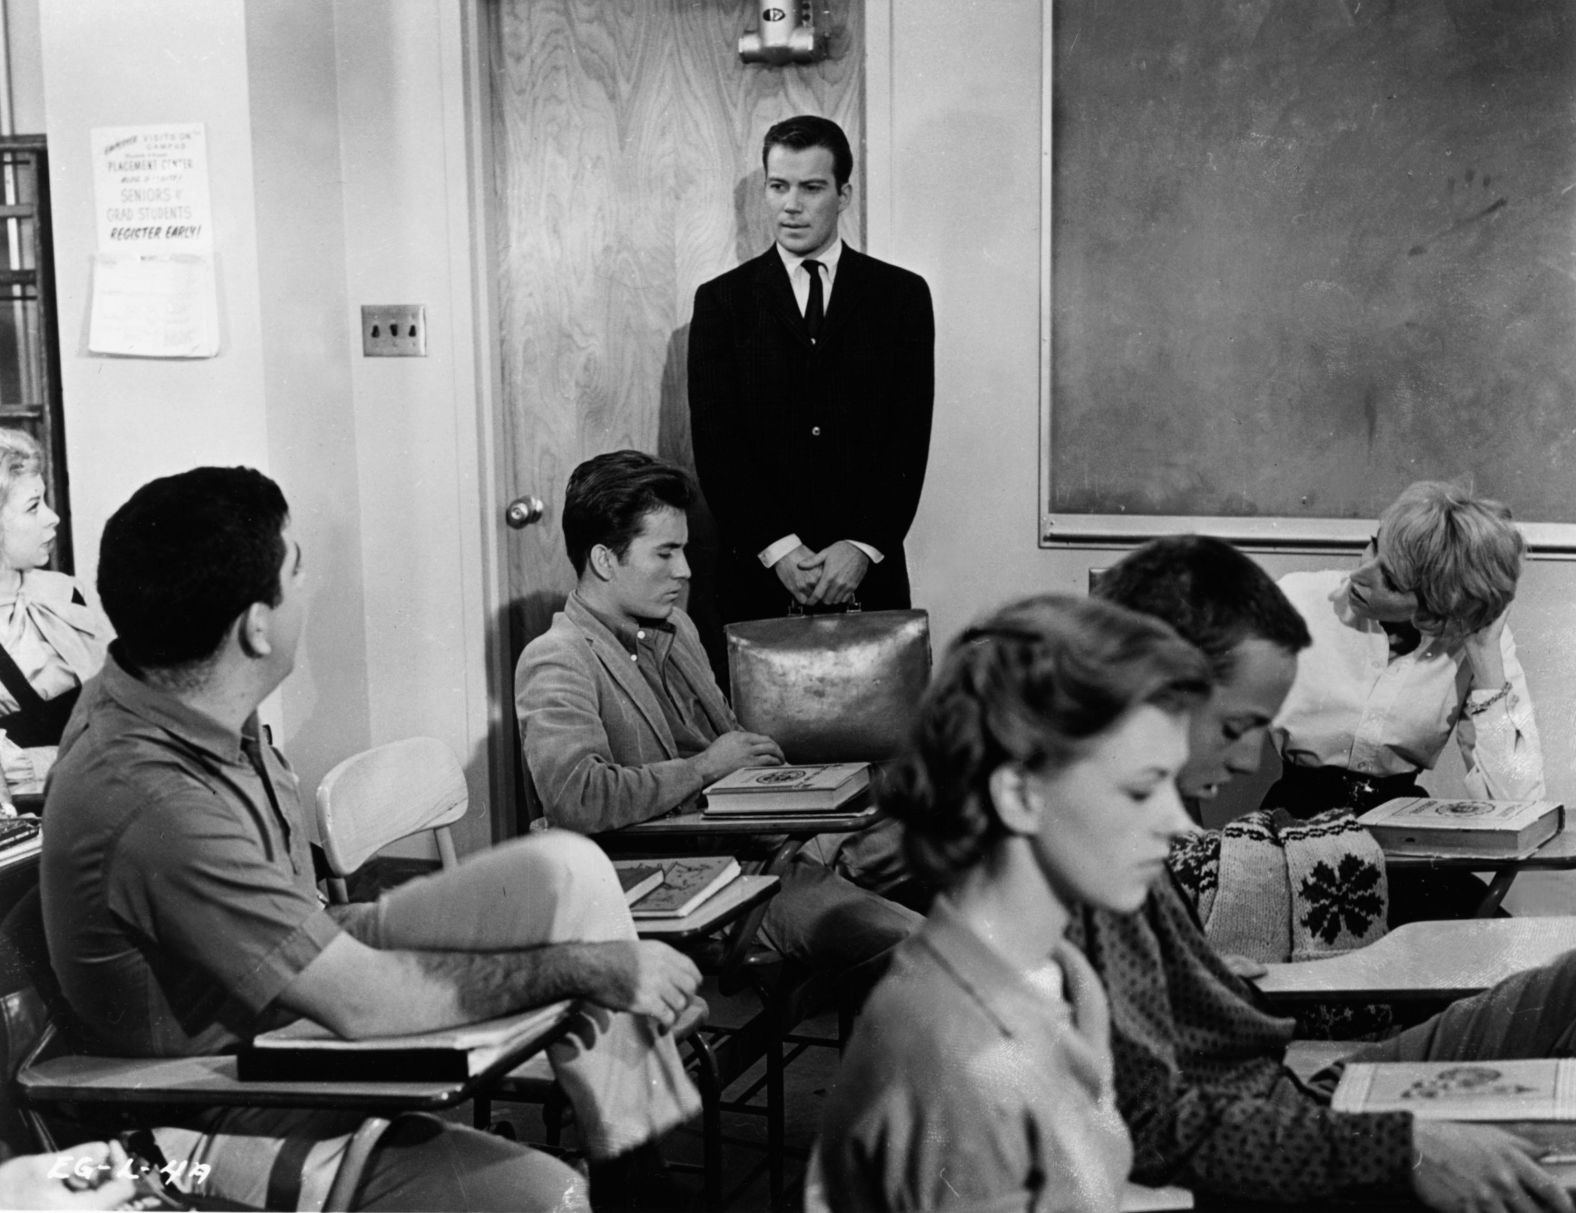 Shatner plays a teacher in the 1961 movie "The Explosive Generation." It was one of his earliest film roles.